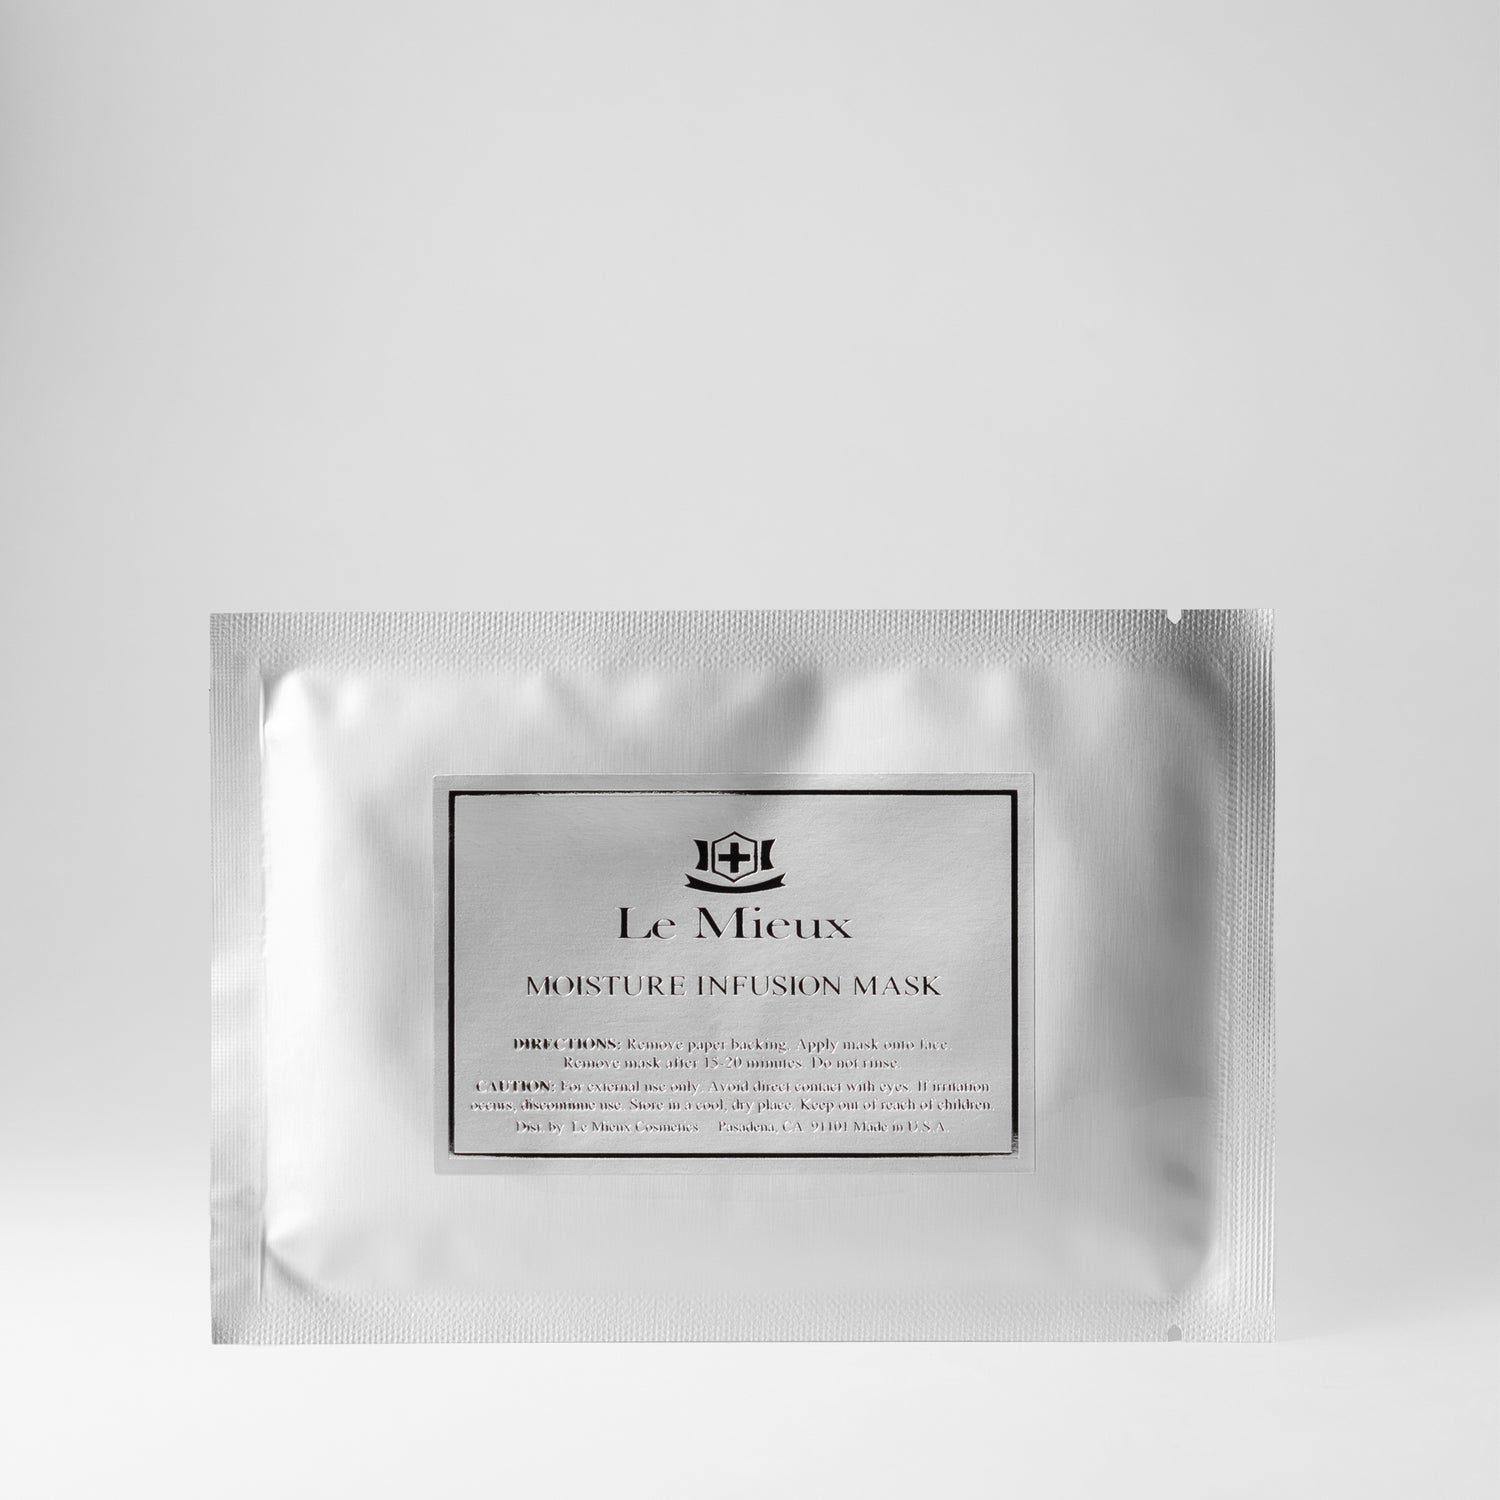  MOISTURE INFUSION MASK from Le Mieux Skincare - 1